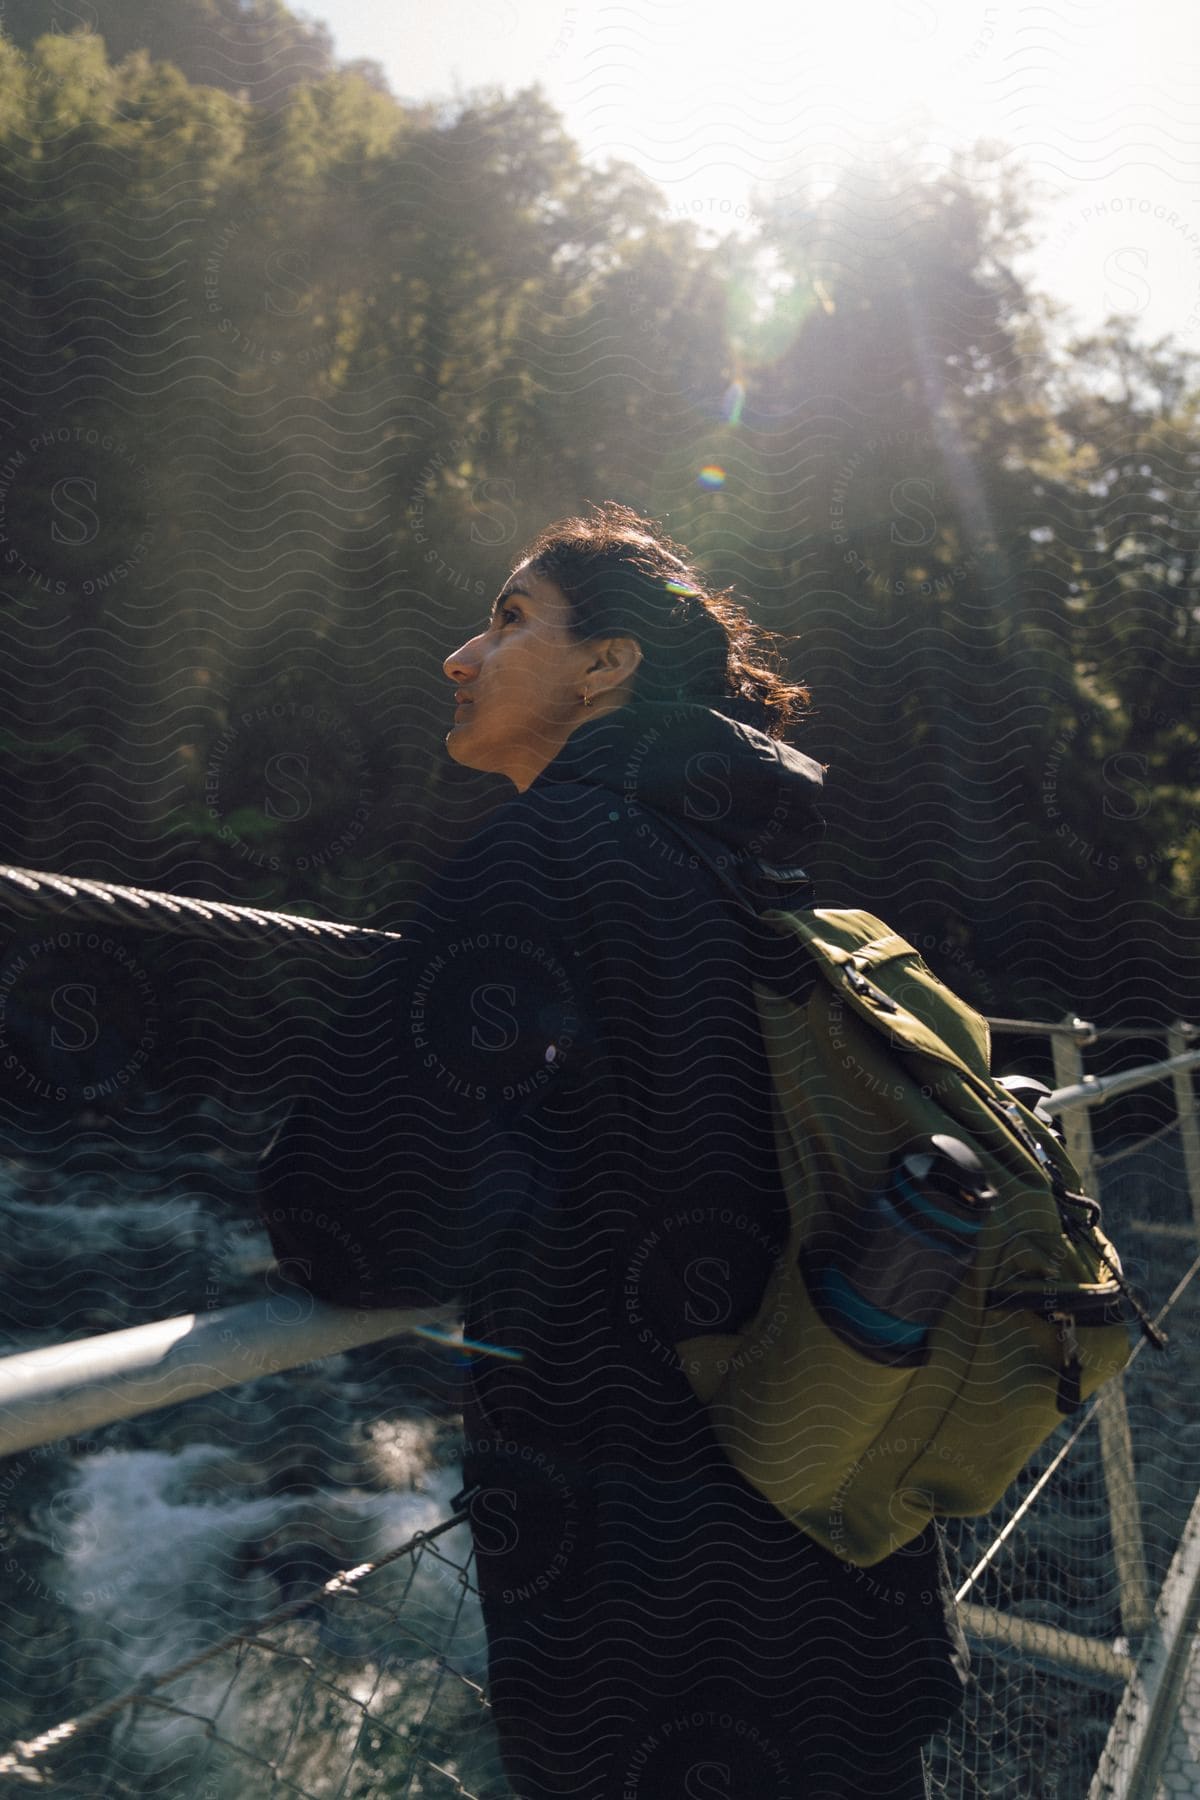 Woman with a backpack standing on a suspension bridge over a river, sunlight filtering through trees.